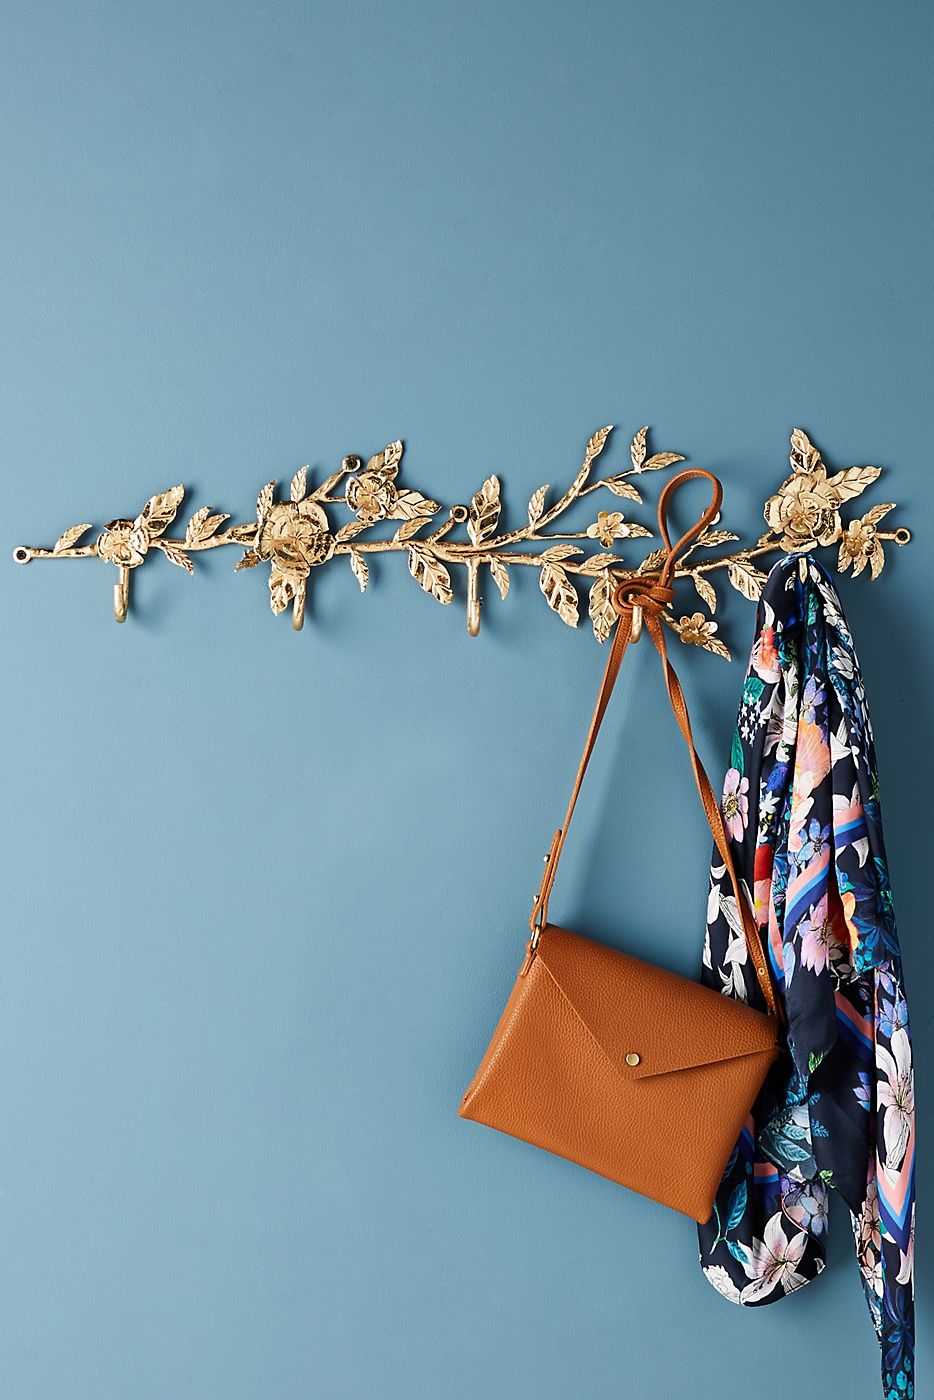 10 Best Decorative Wall Hooks For Your Home - Cute Coat Hooks